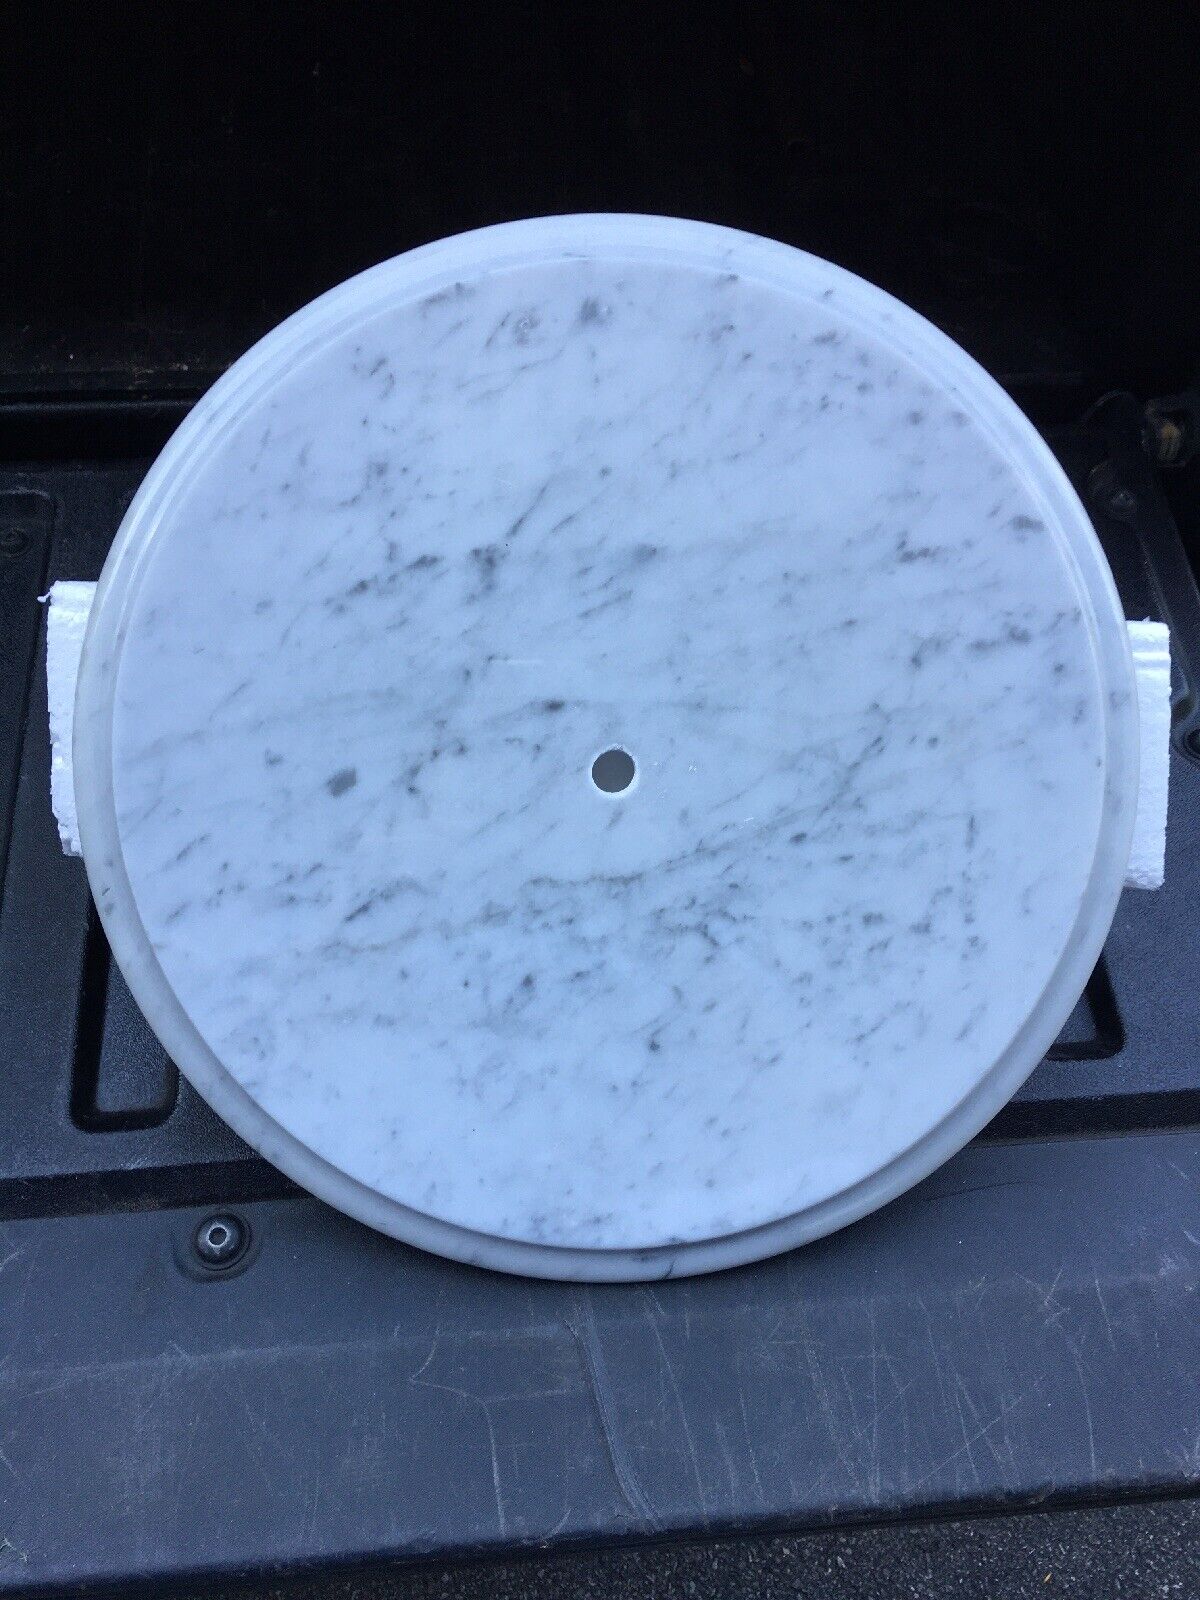 15 “WHITE  Venatino MARBLE TABLE TOP REPLACEMENT (3/4 Thick ) MADE iN ITALY 🇮🇹